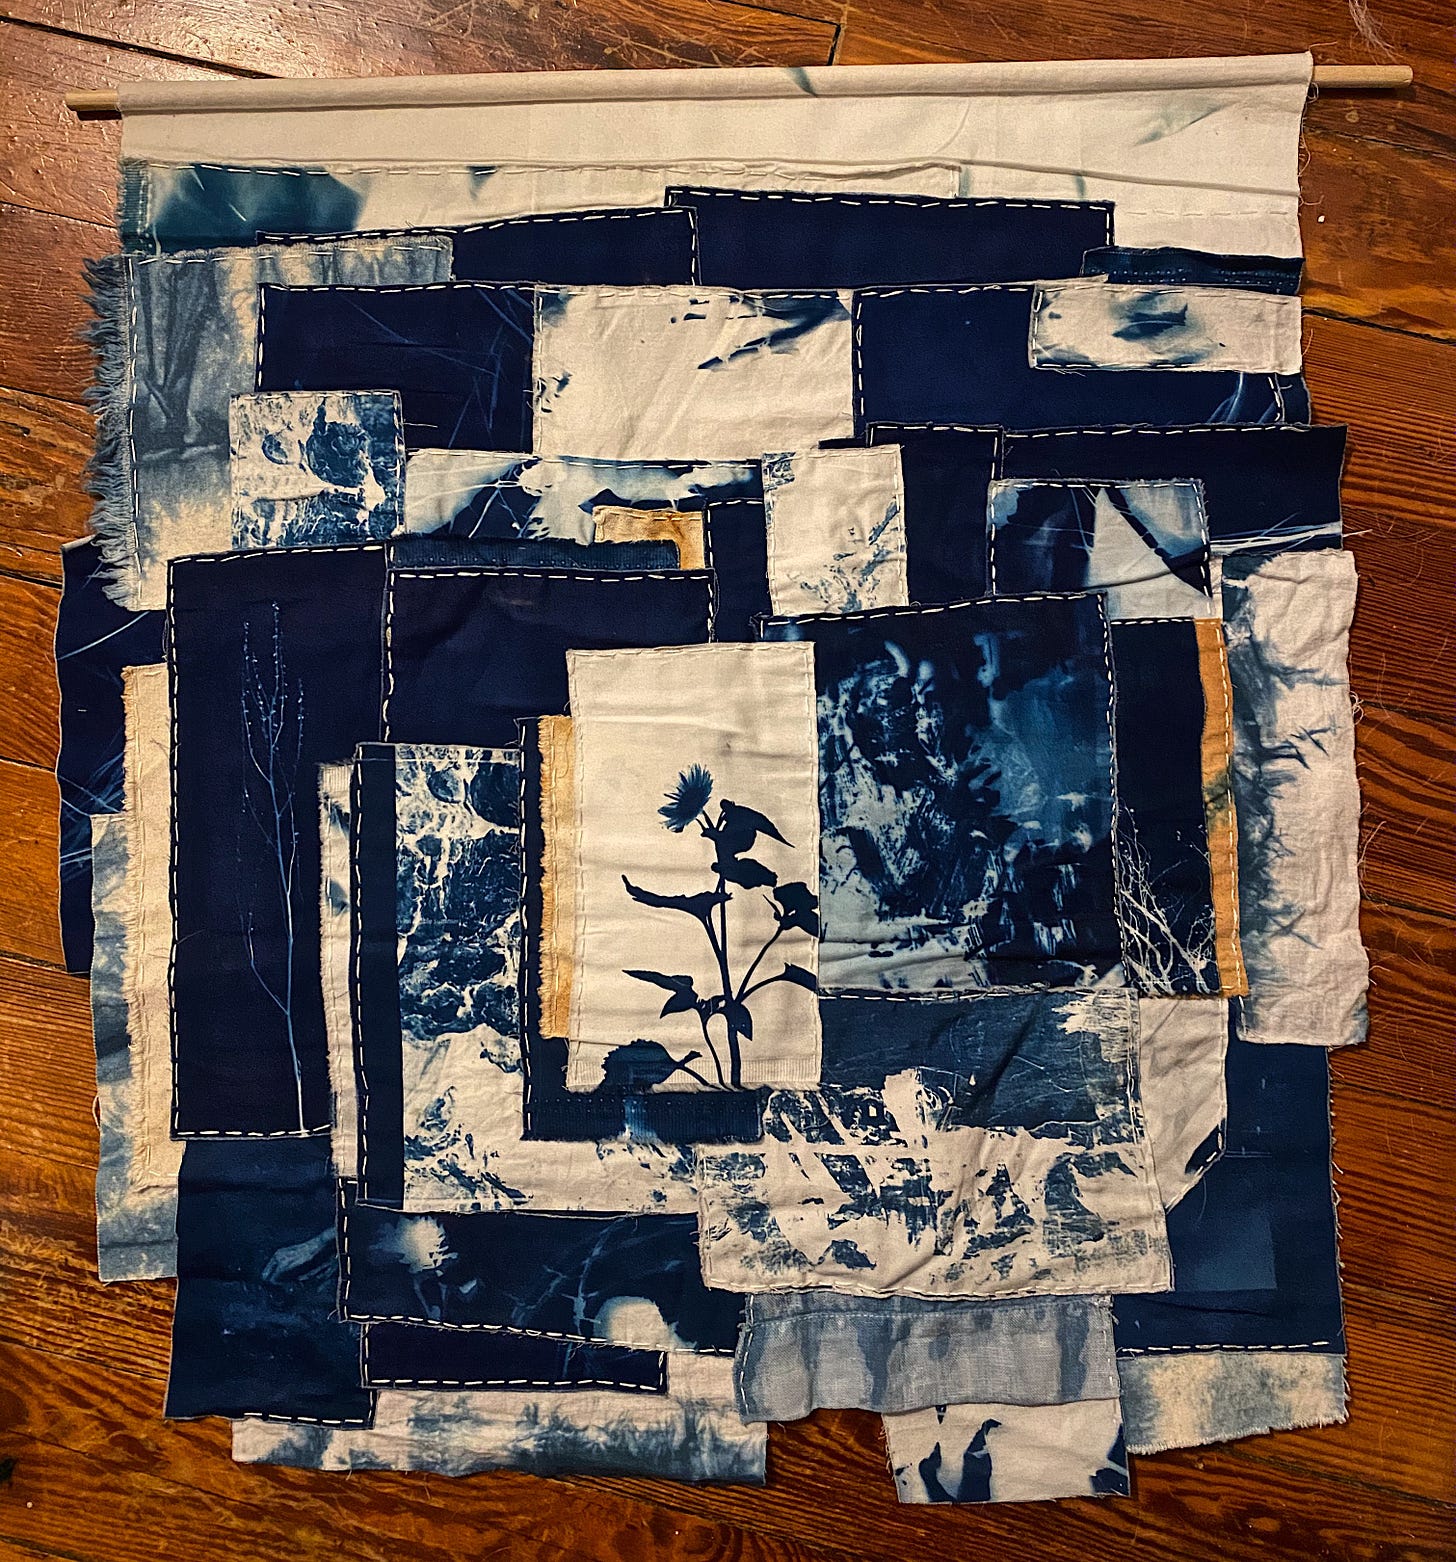 Photograph of Lanecia Rouse Tinsley's "In All Seasons." Cyanotype on fabric (2019)